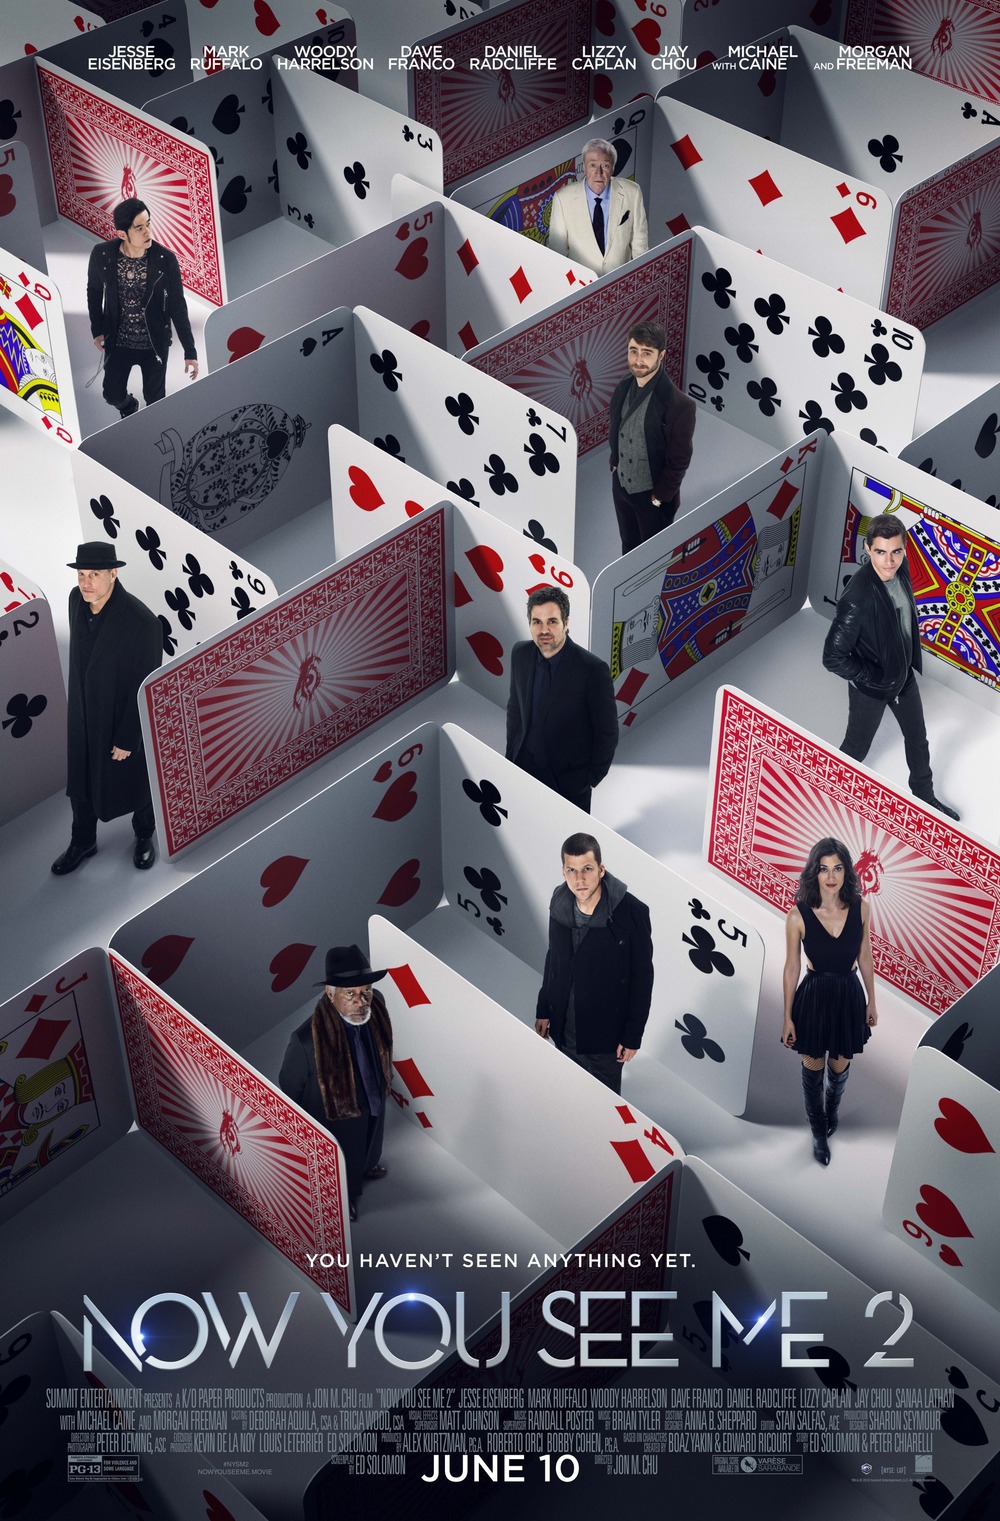 Now You See Me 2 DVD Release Date | Redbox, Netflix, iTunes, Amazon